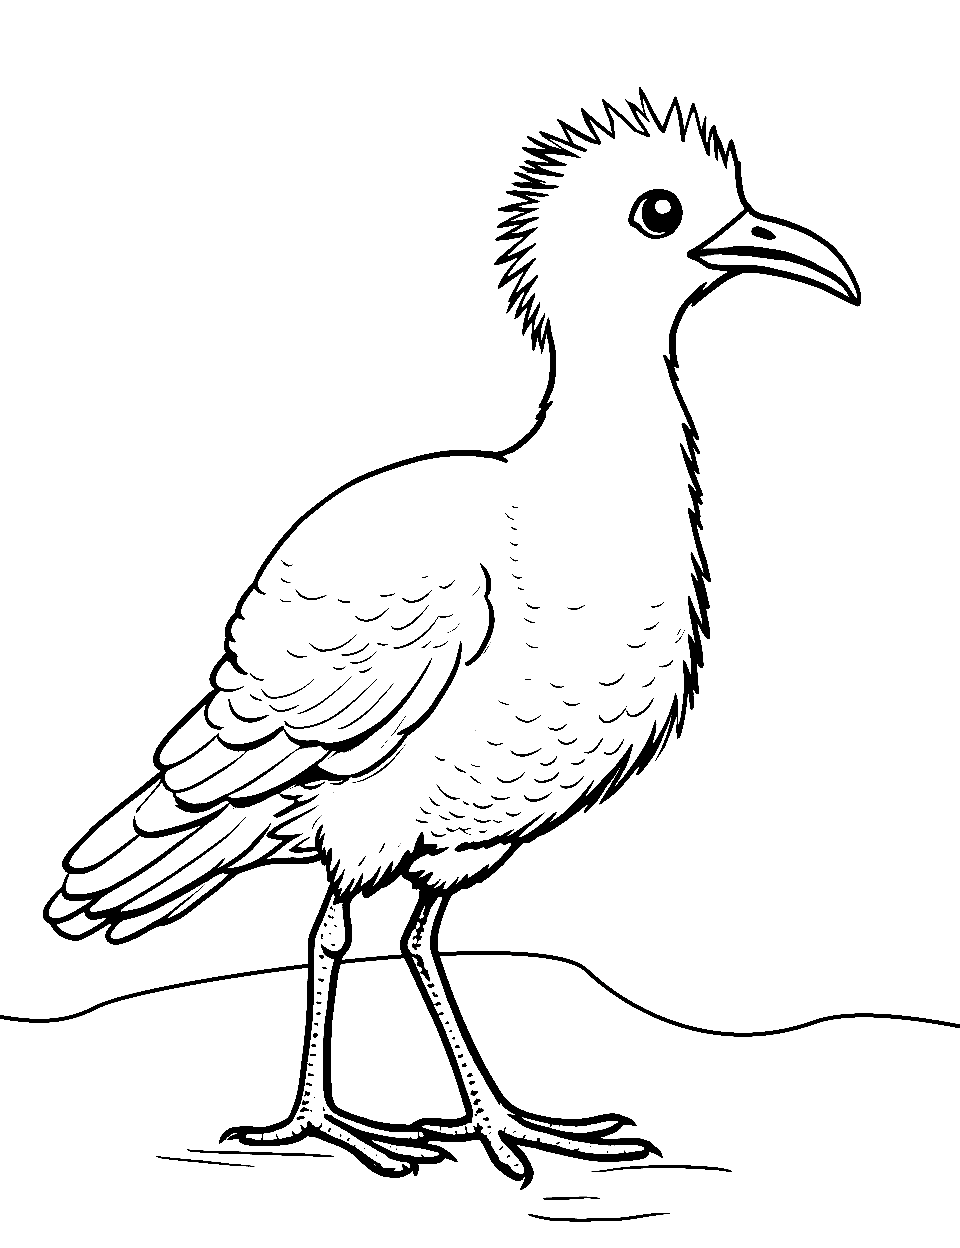 Ostrich in Sand Dance Coloring Page - An ostrich playing around in the sand.